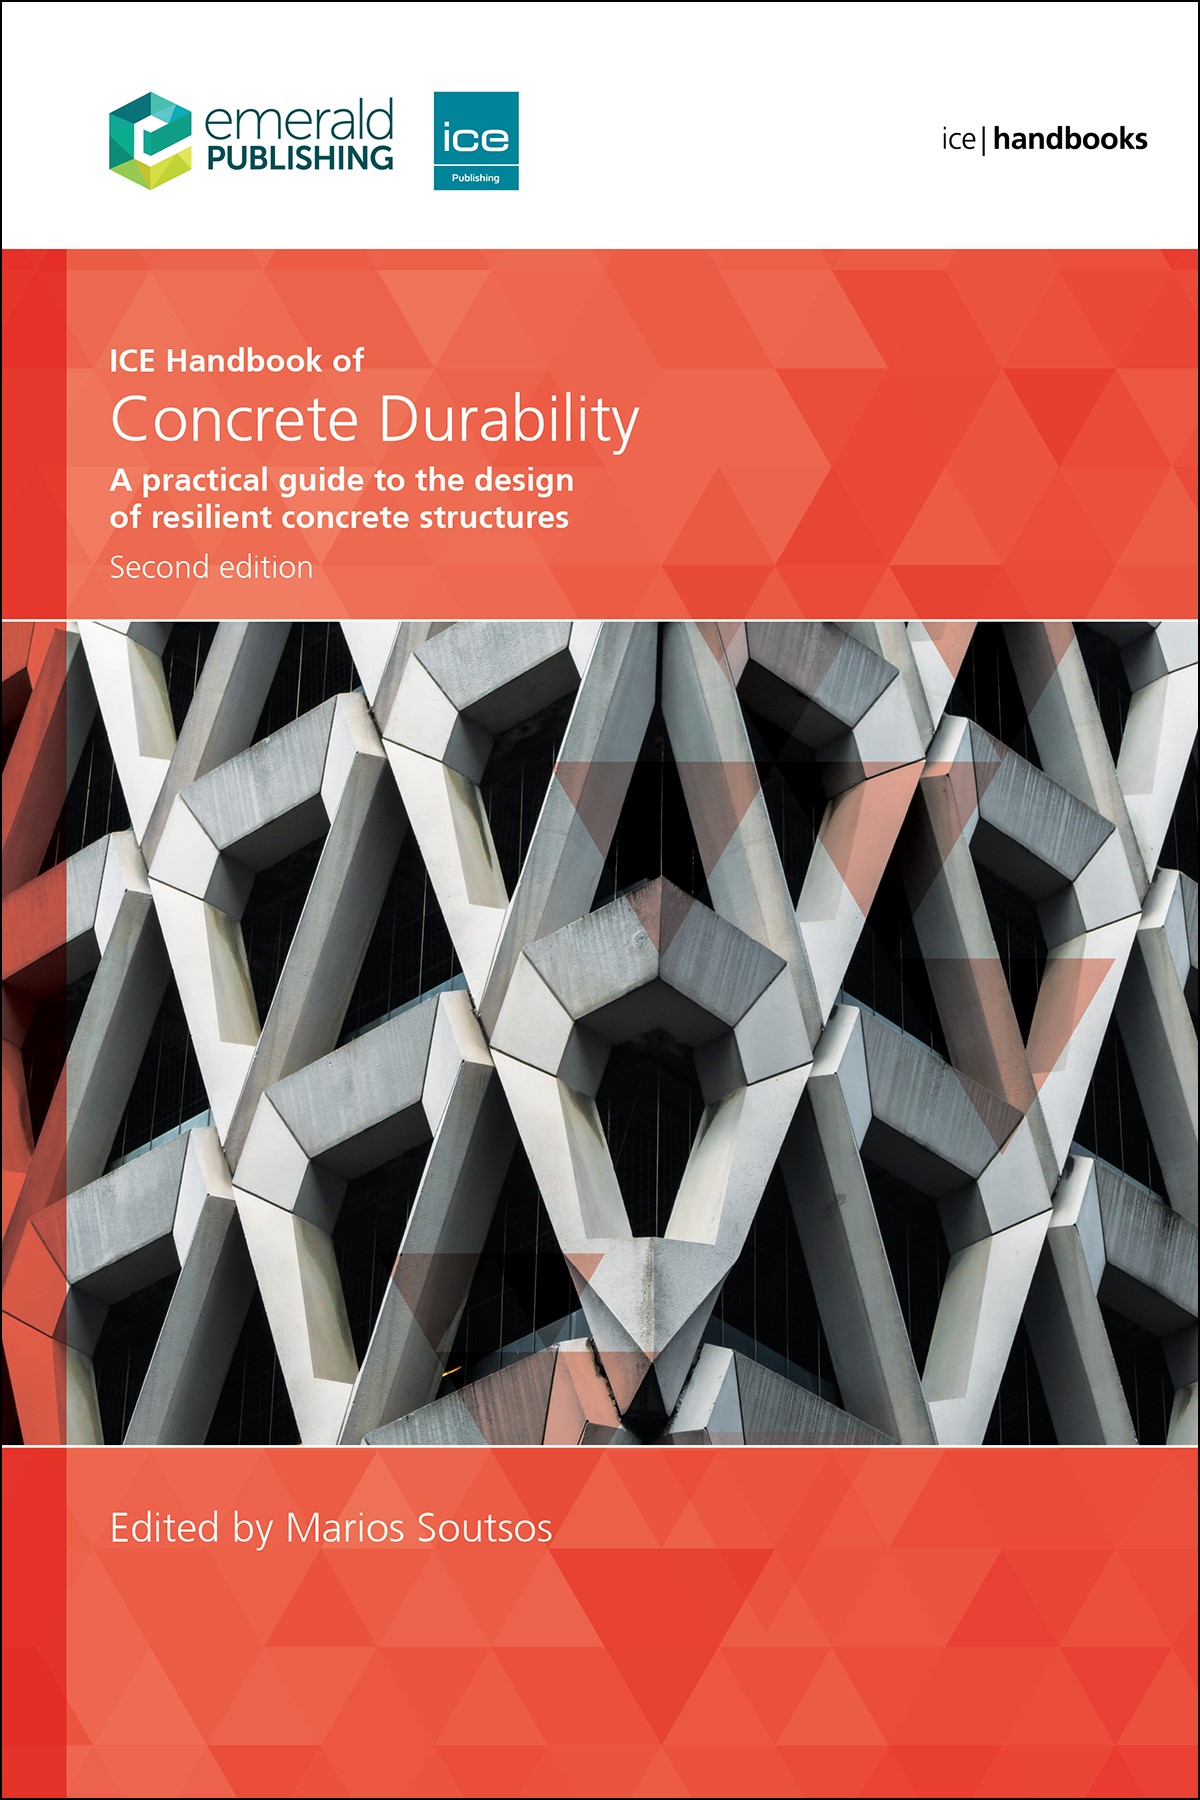 ICE Handbook of Concrete Durability: A practical guide to the design of resilient concrete structures, Second edition